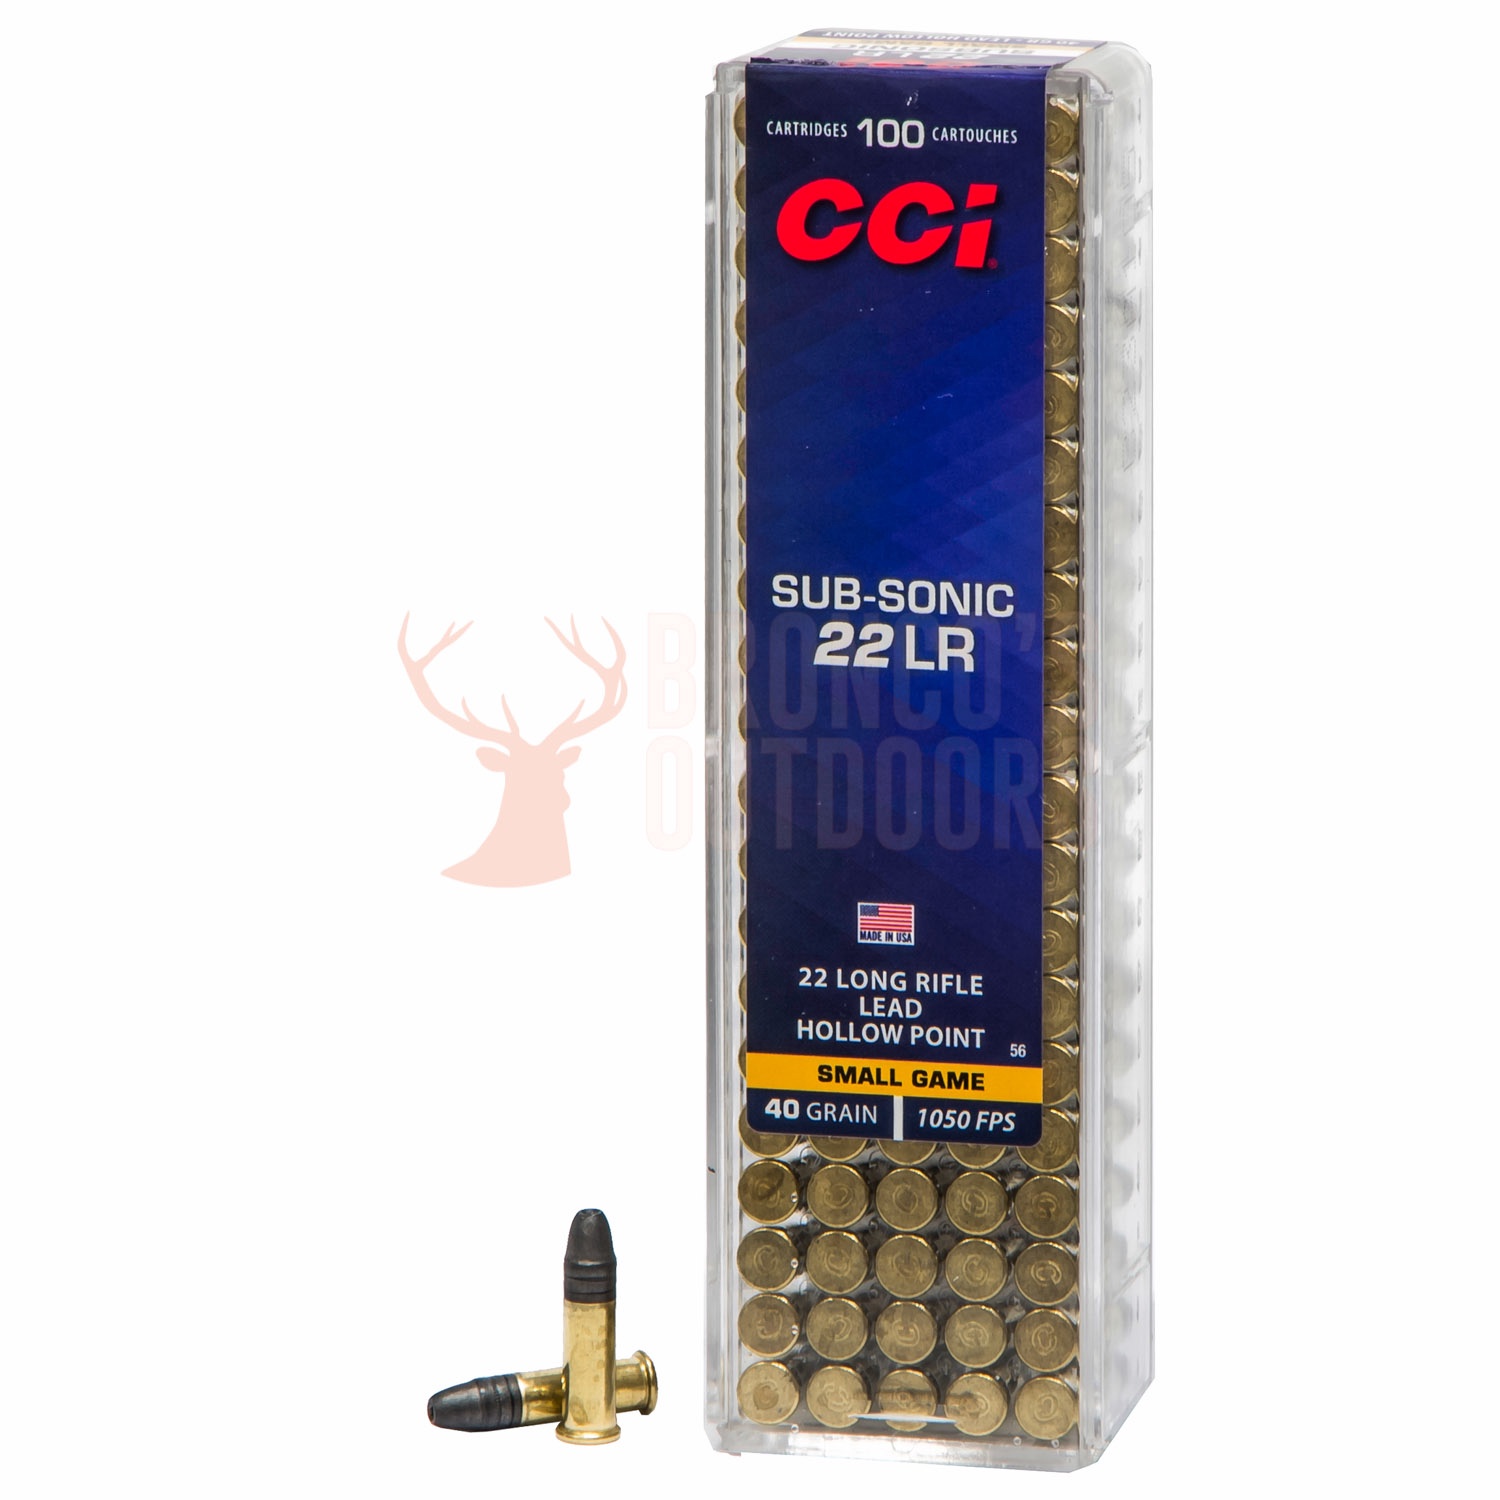 22lr subsonic rounds